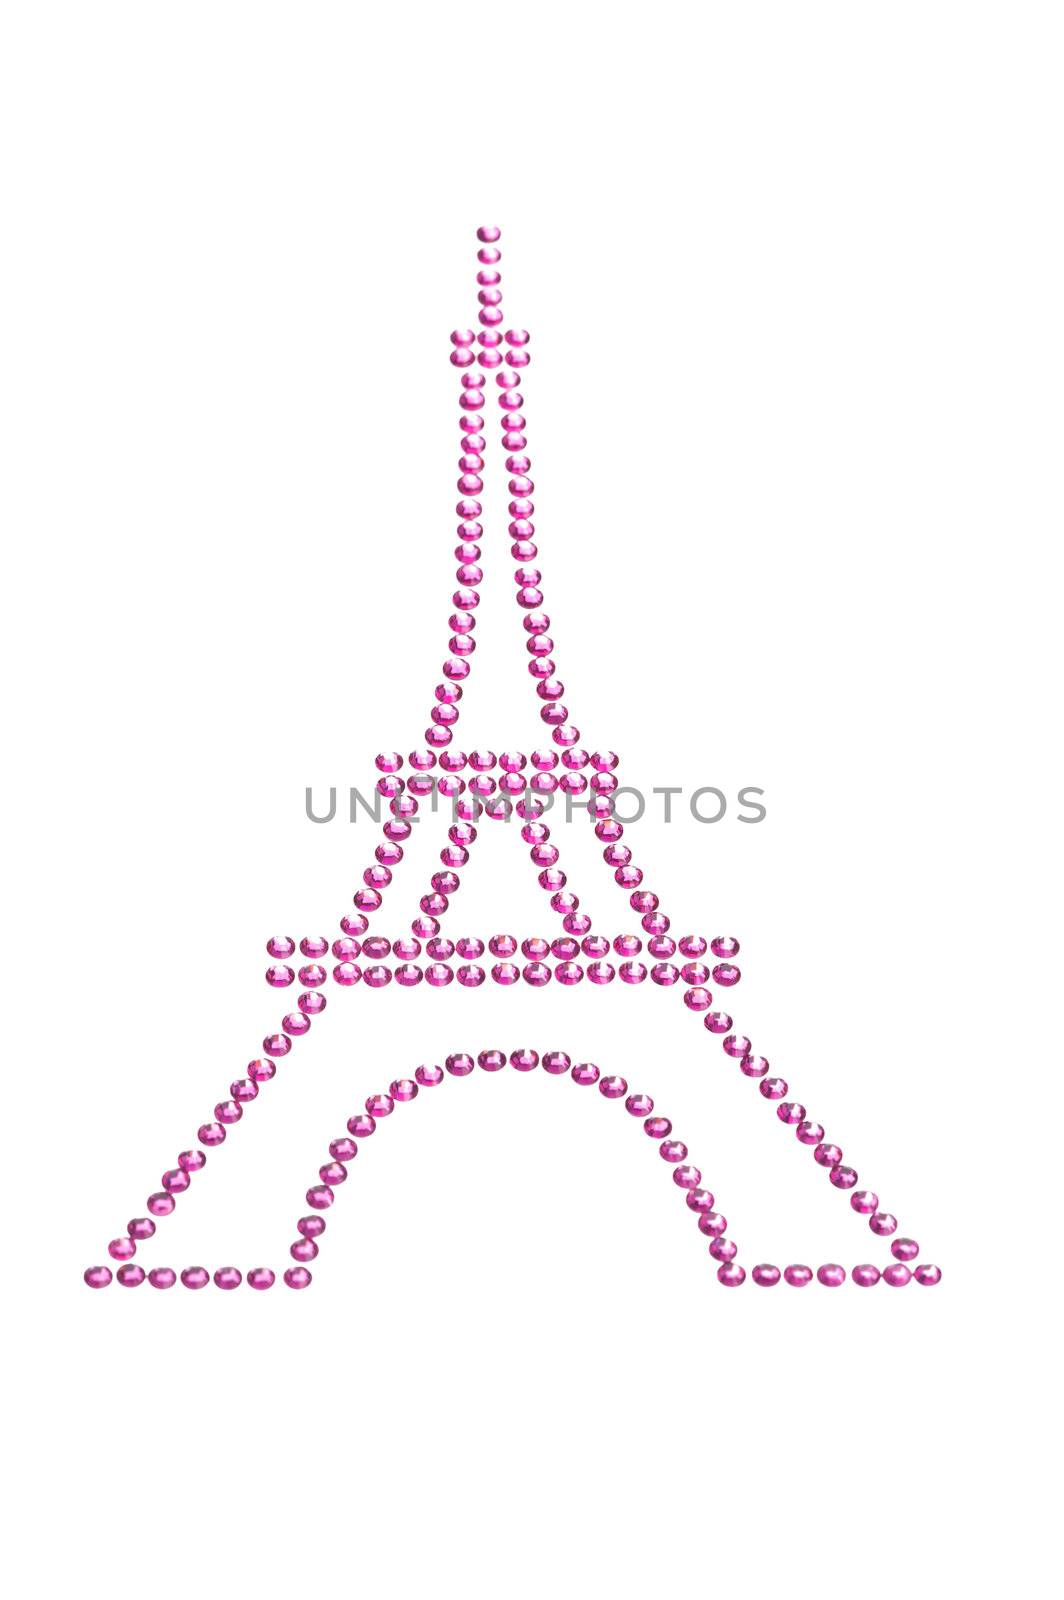 Eifel Tower in Pink made of Rhinestones over white